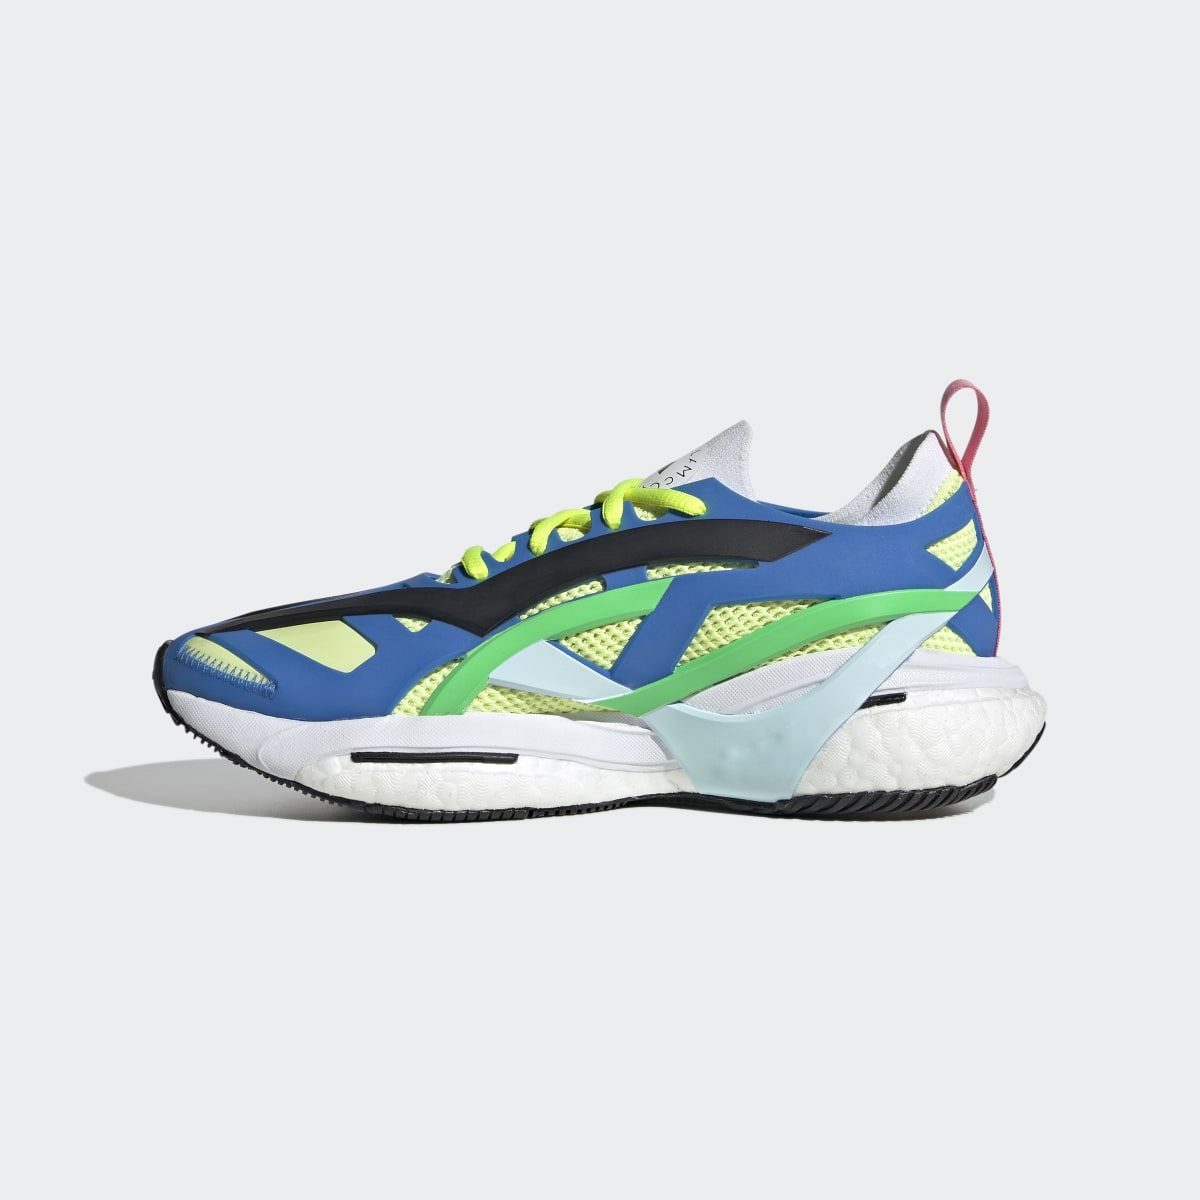 Adidas by Stella McCartney Solarglide Running Shoes. 7